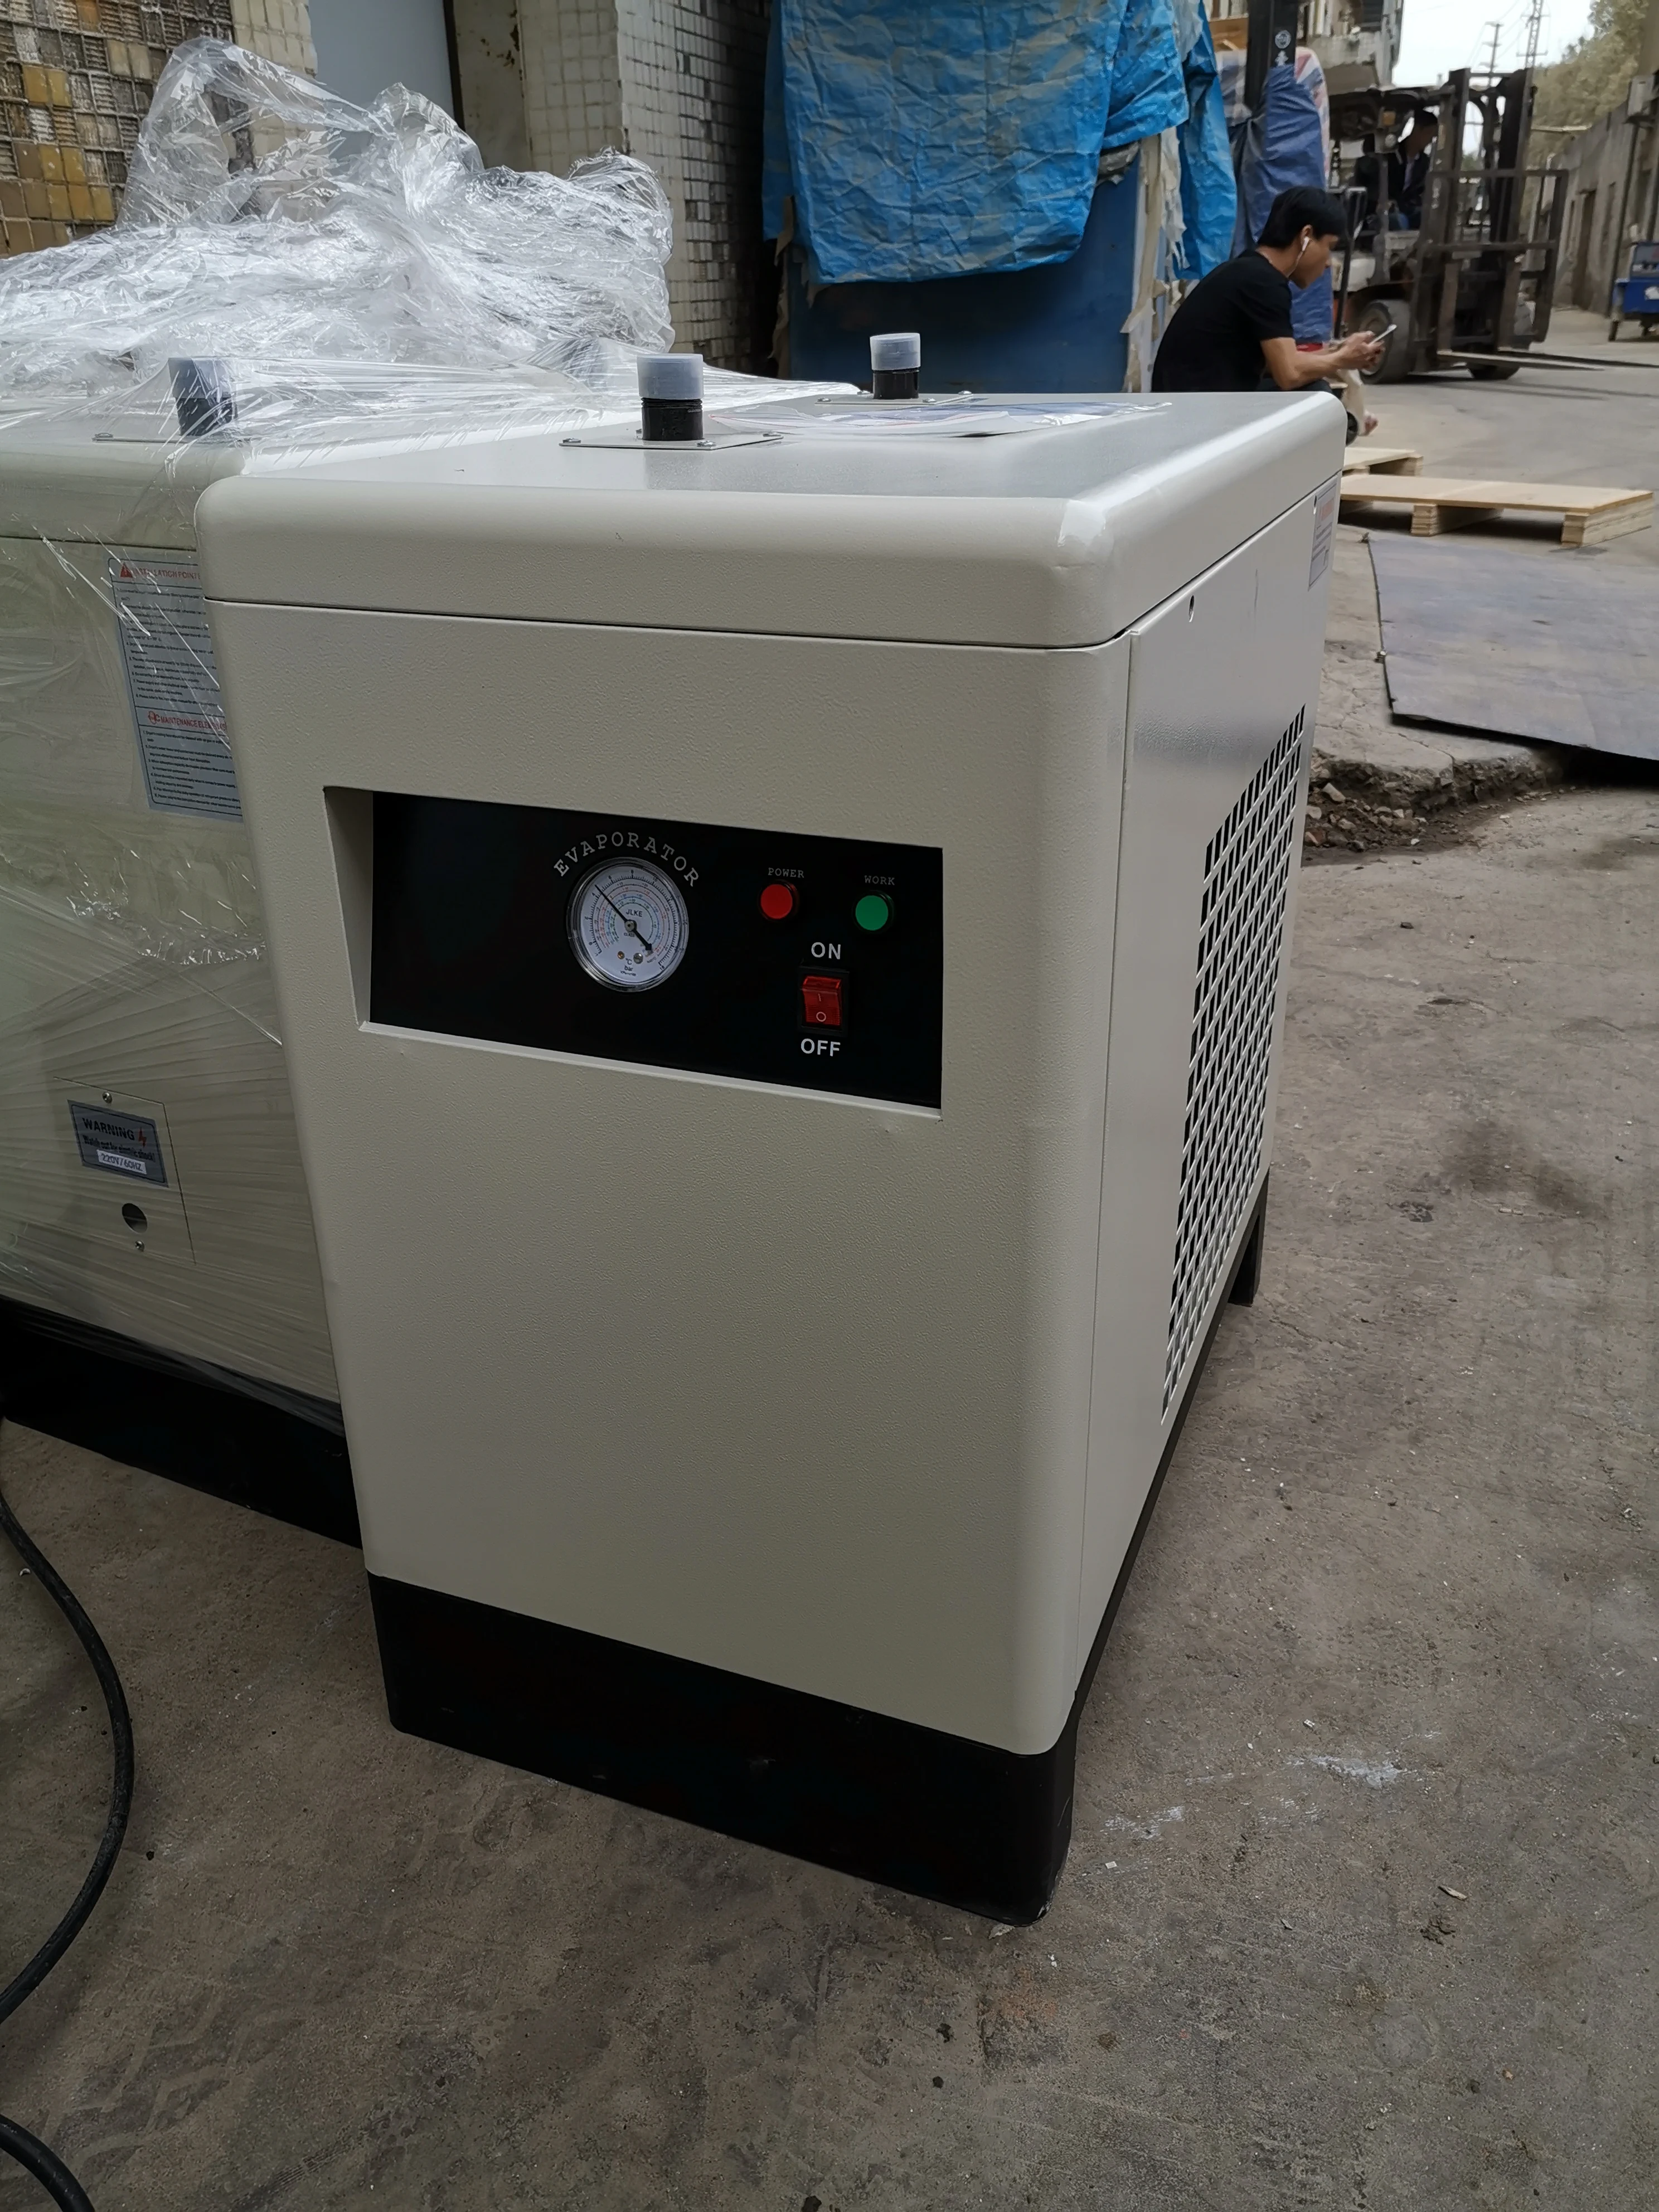 ZAKF AC-10 Refrigerant Air Dryer Freeze Drying Machine 7.5KW Refrigerator For Sale images - 6